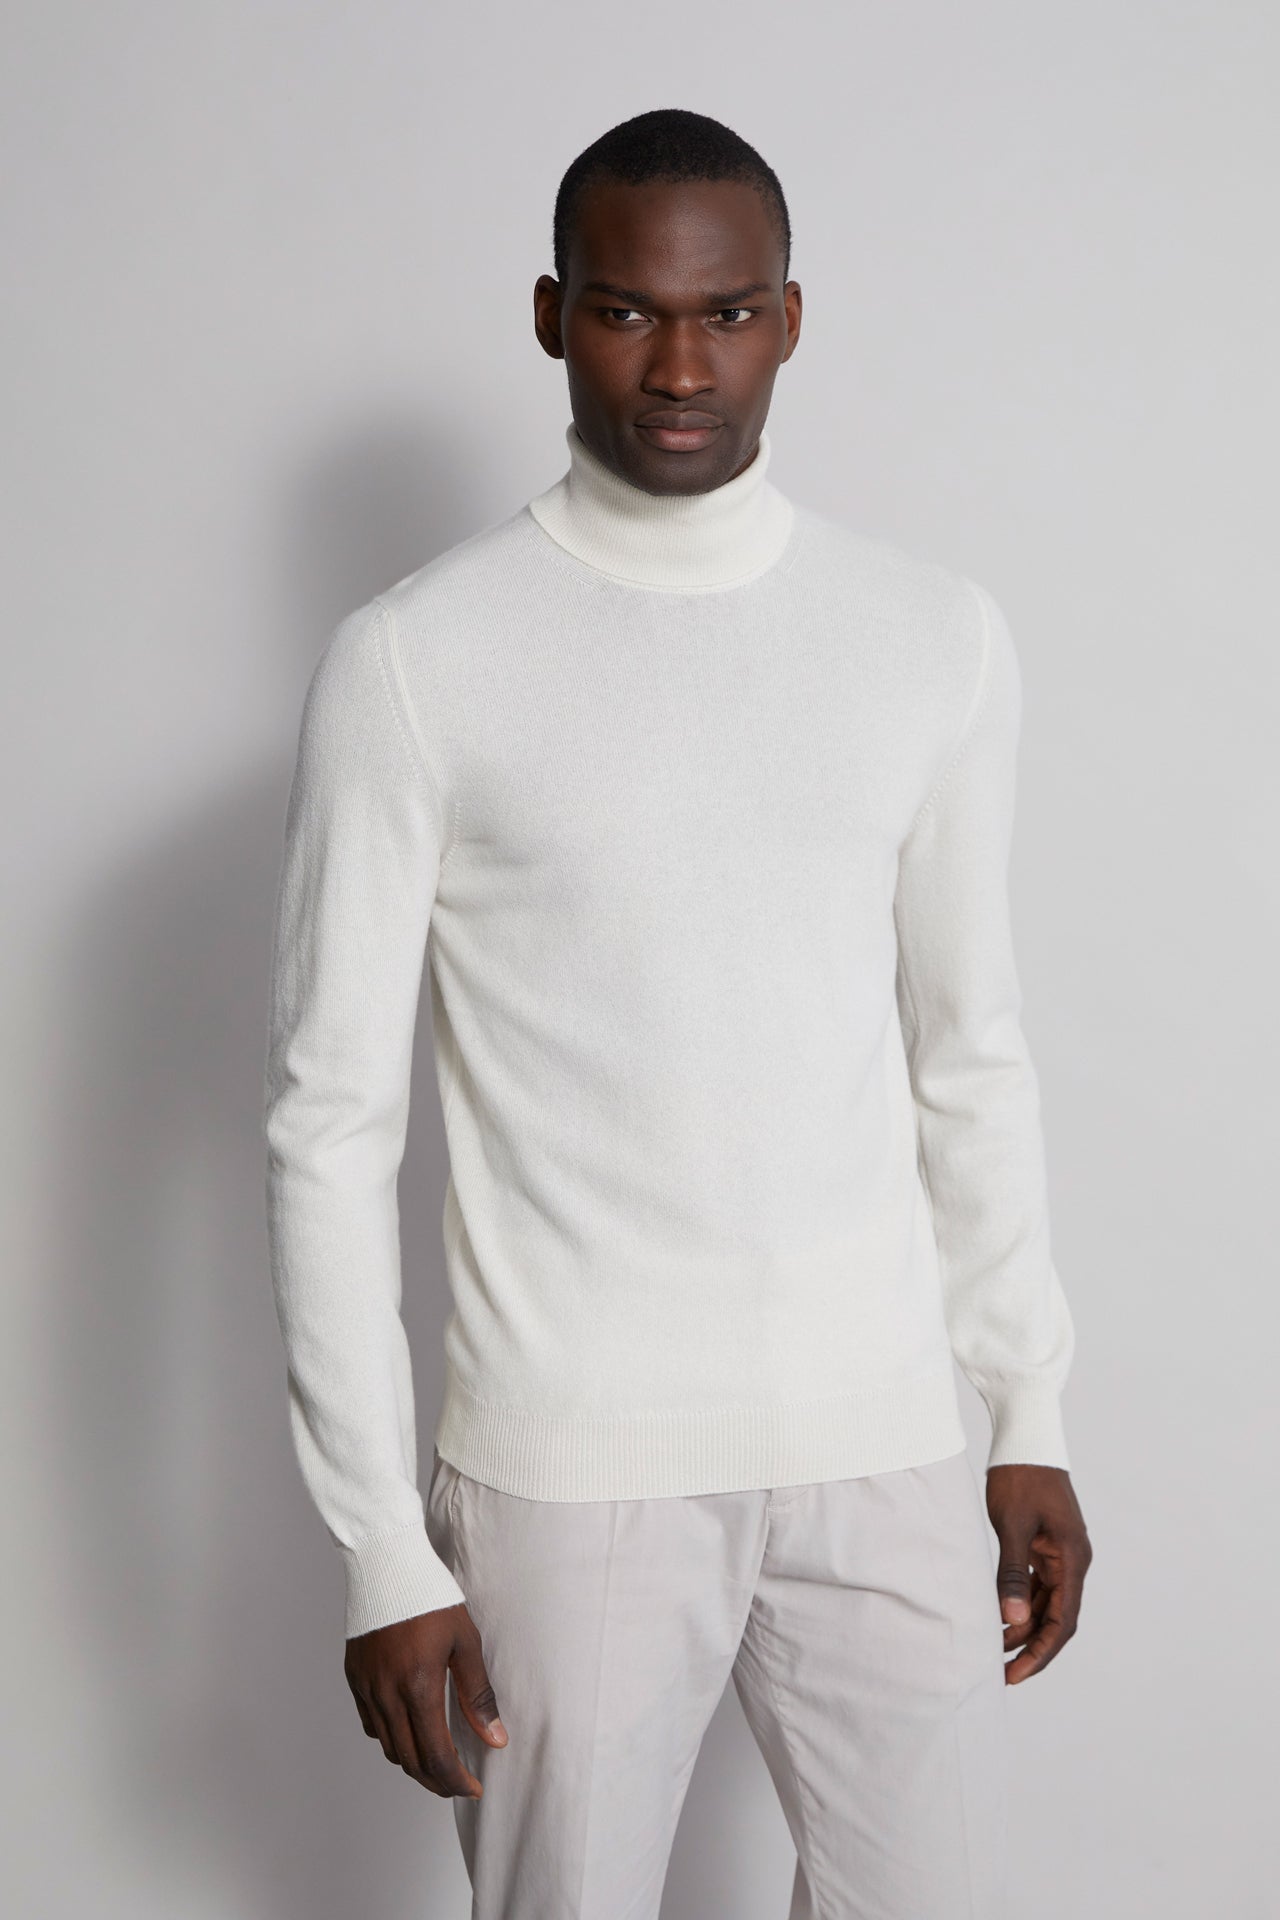 Derby cashmere turtleneck in iconic colors